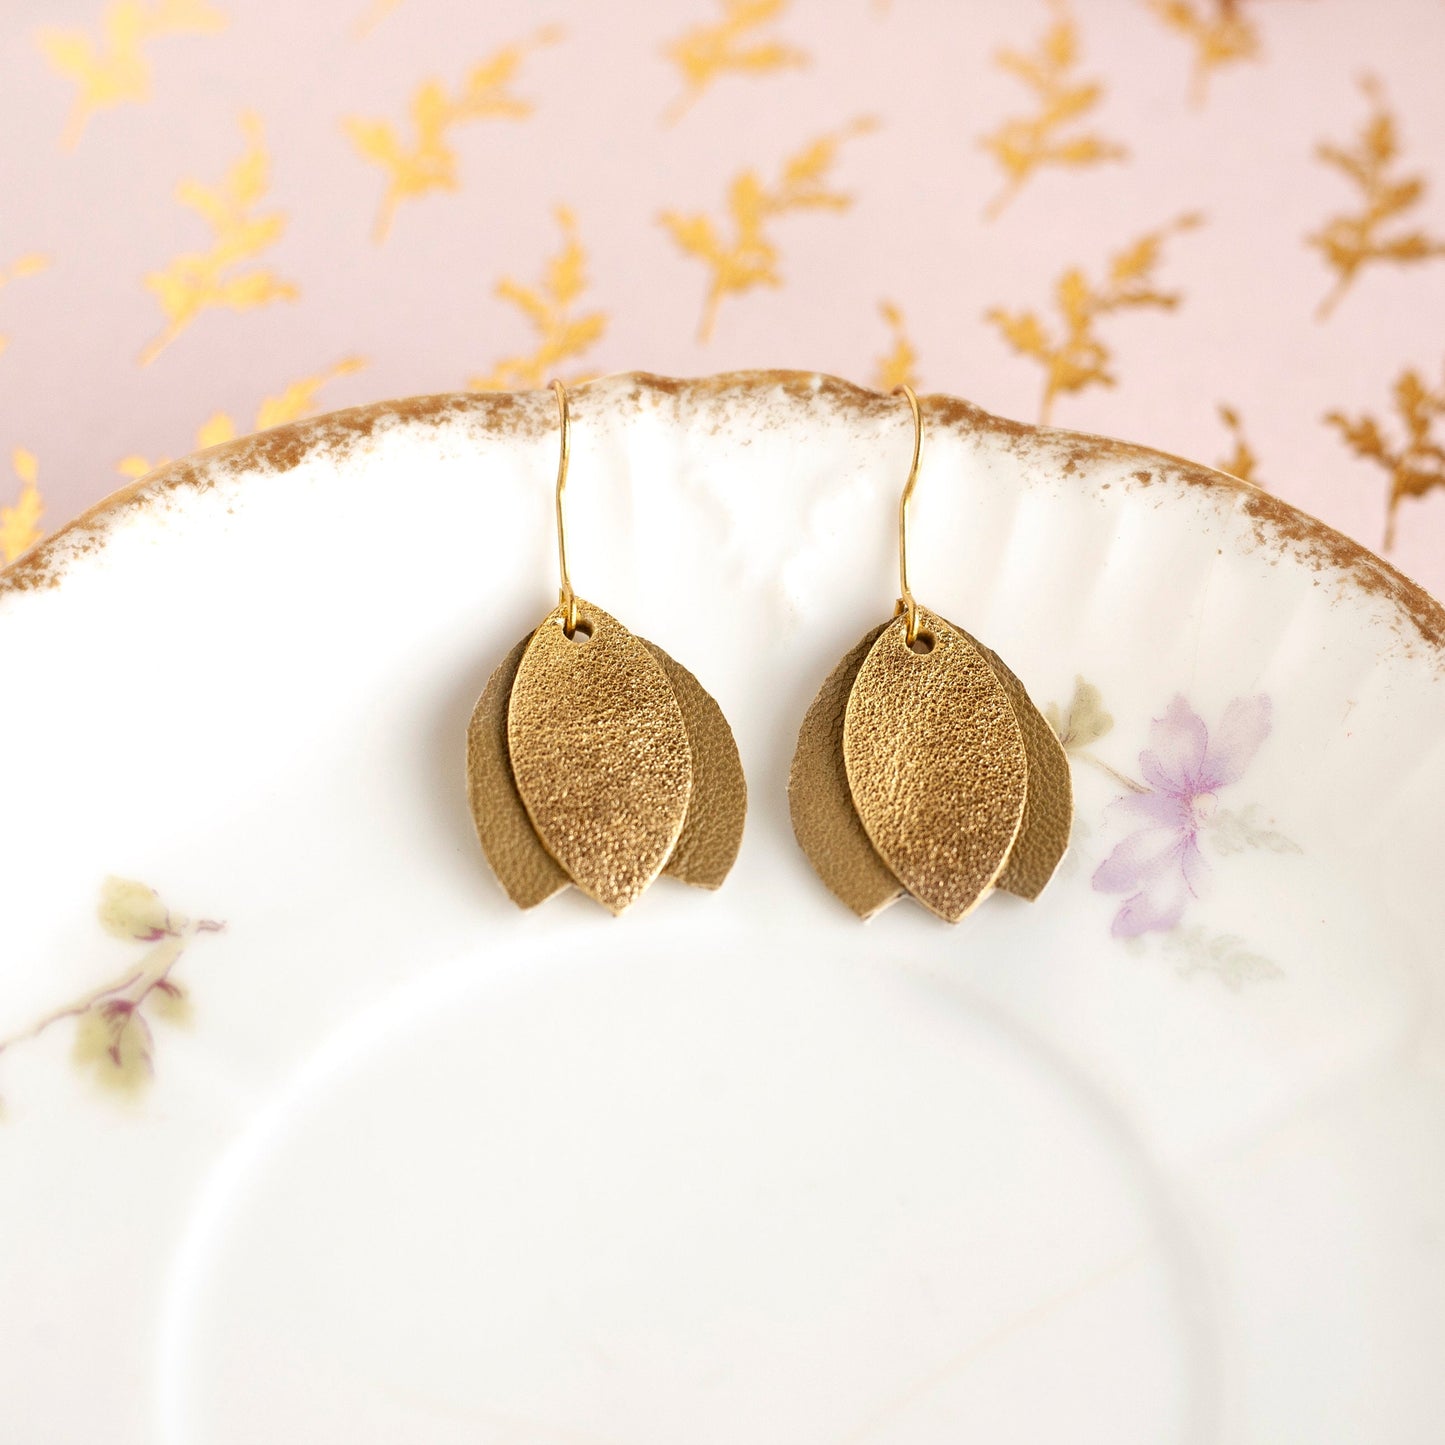 Gold and olive green leather tulip earrings